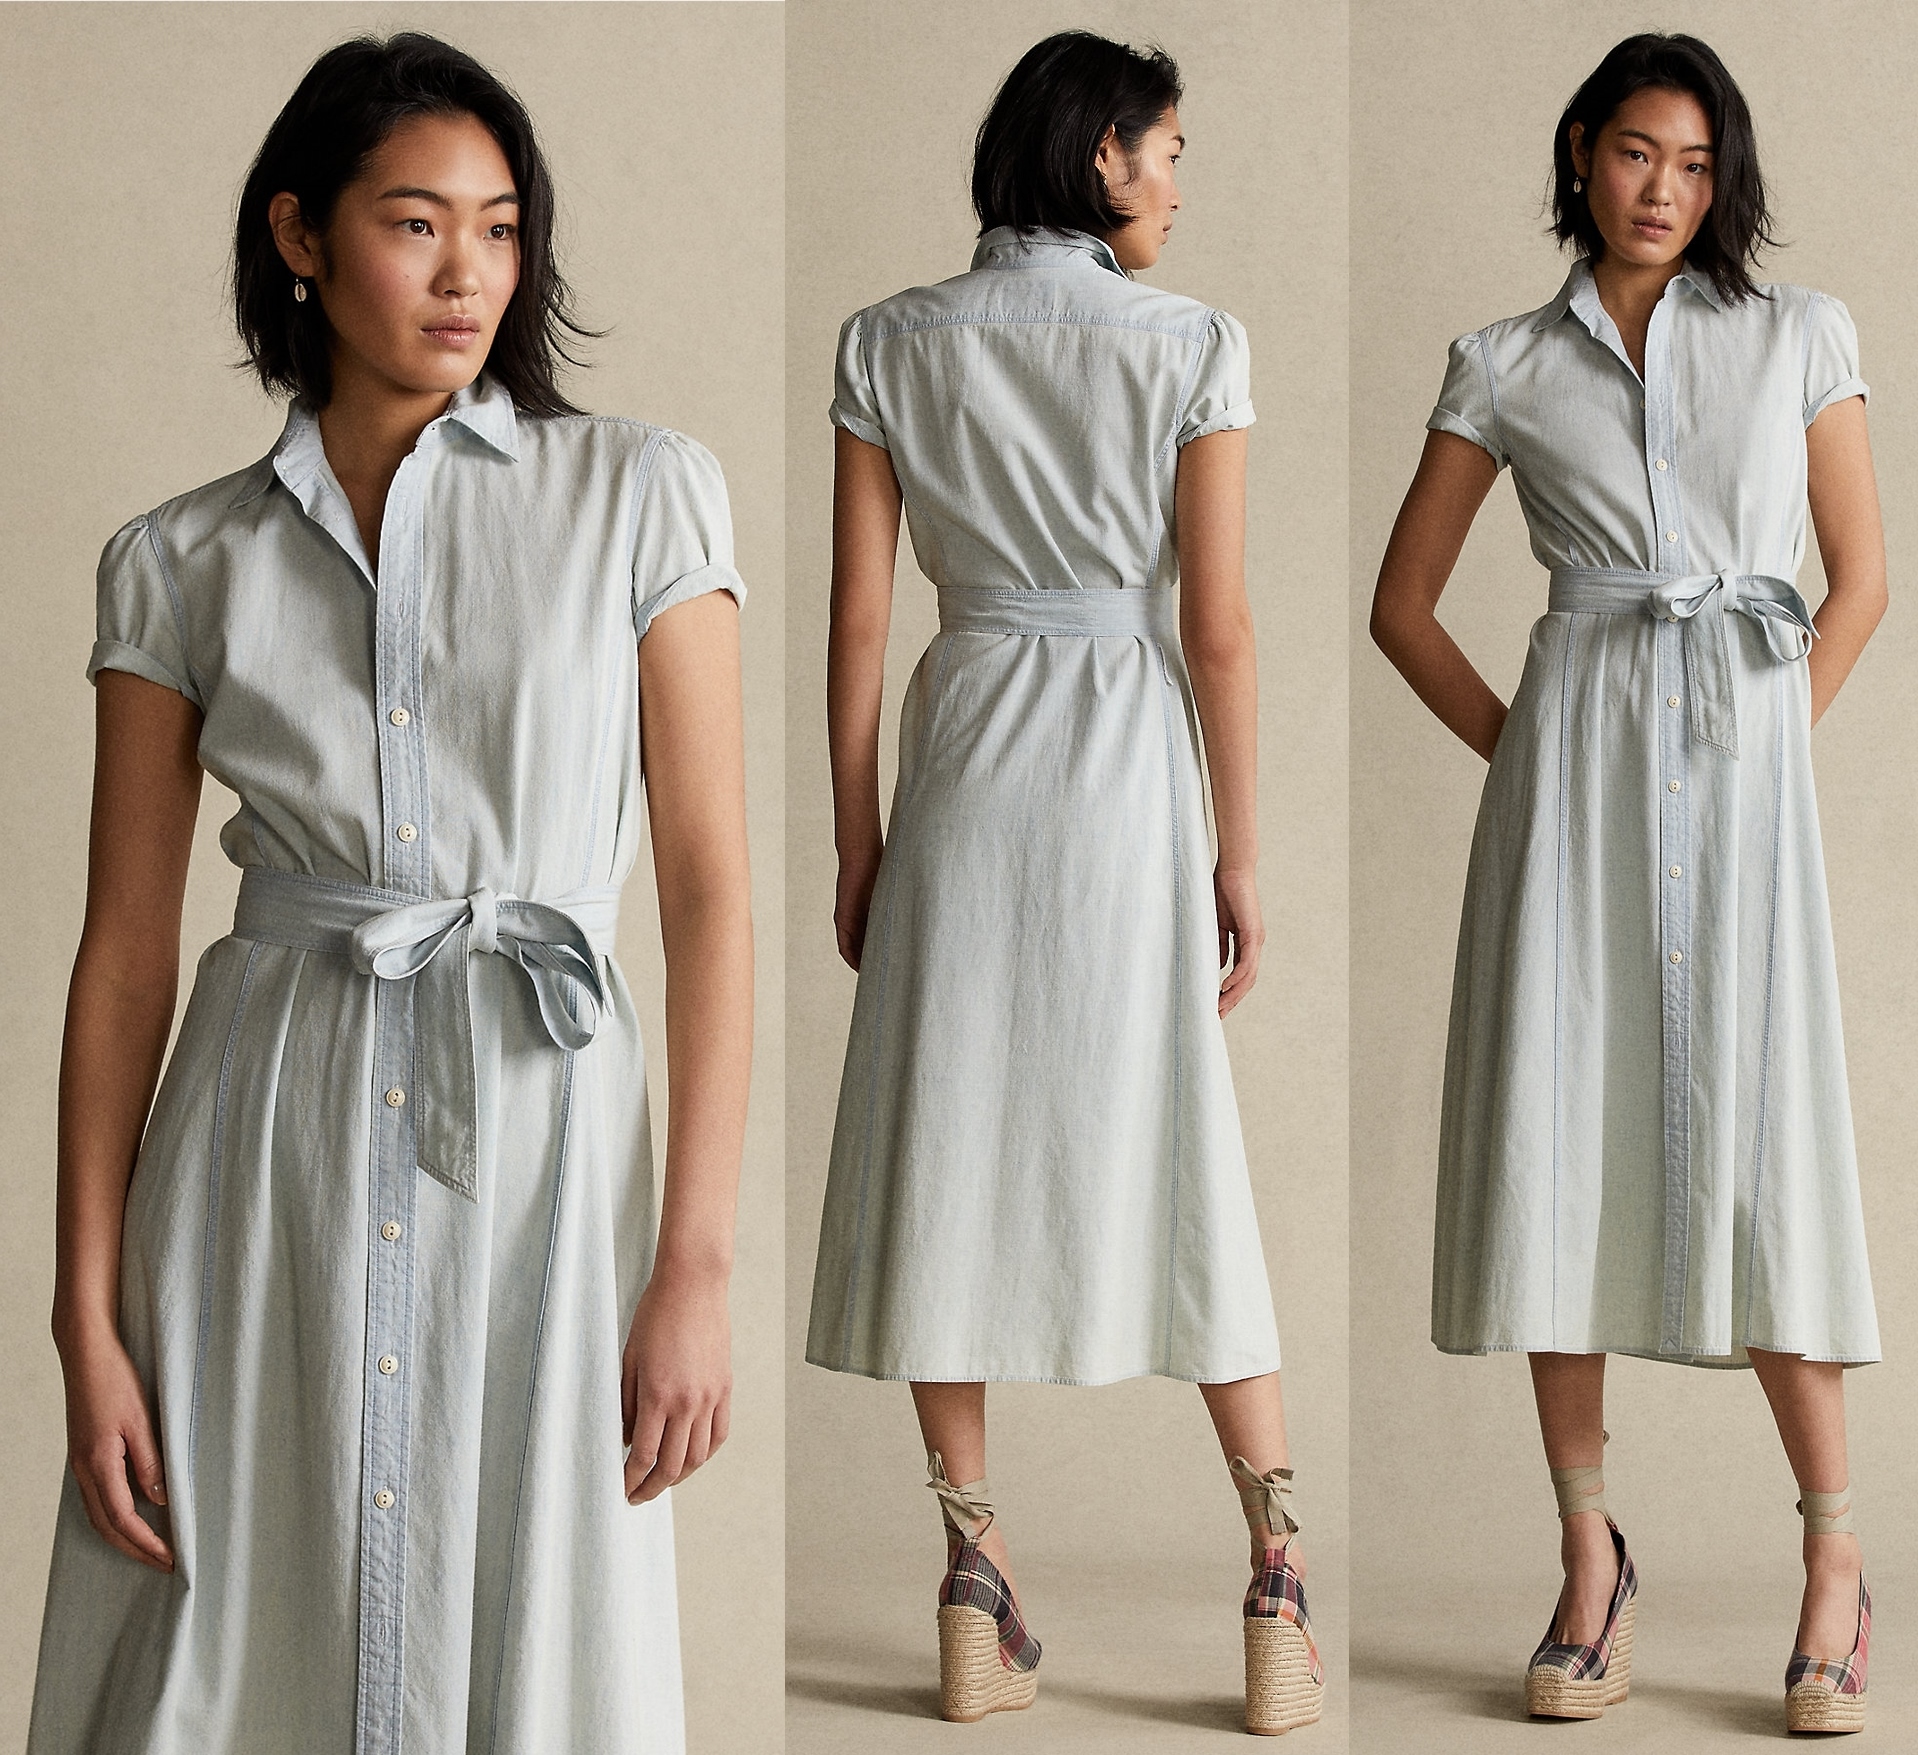 Presented in a casual chambray hue, this lightweight cotton shirtdress features a fluid A-line skirt and is accented with a self-belt at the waist